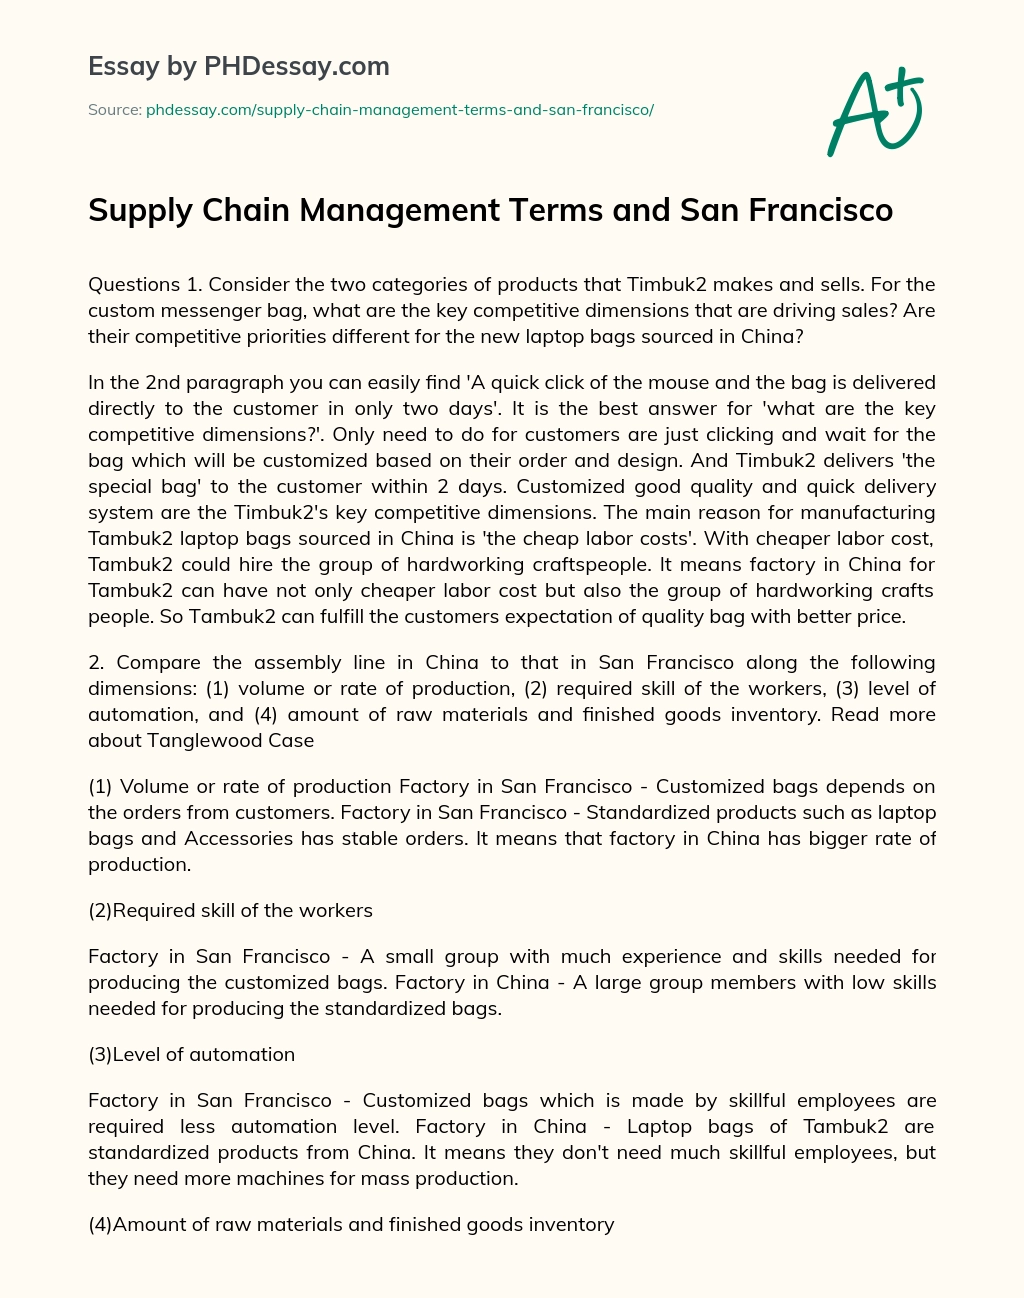 Supply Chain Management Terms and San Francisco essay